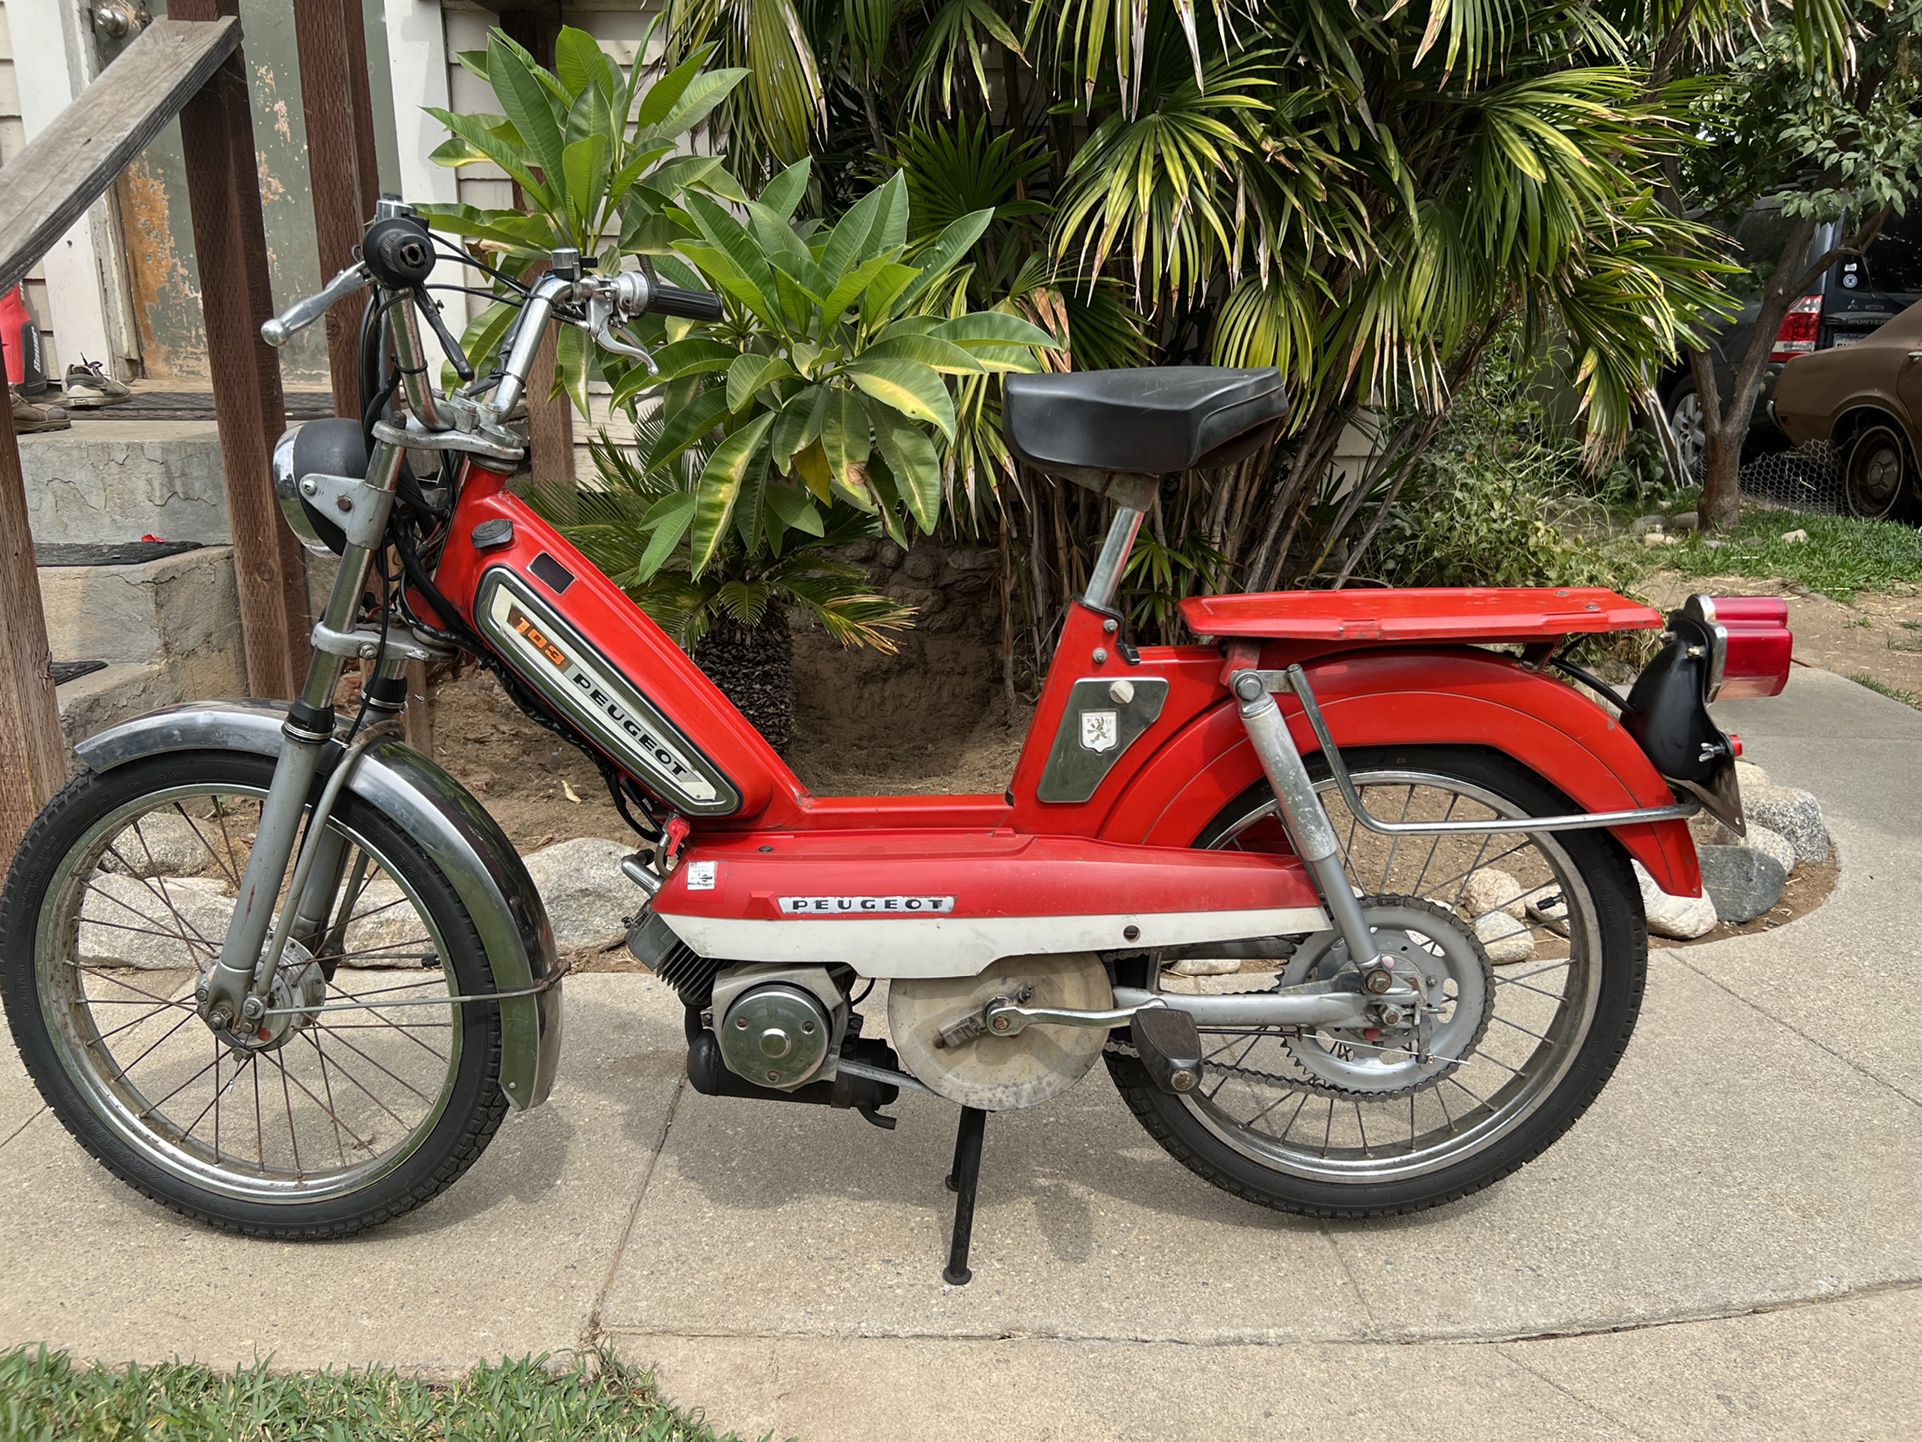 1978 Peugeot 103 moped for Sale CA - OfferUp